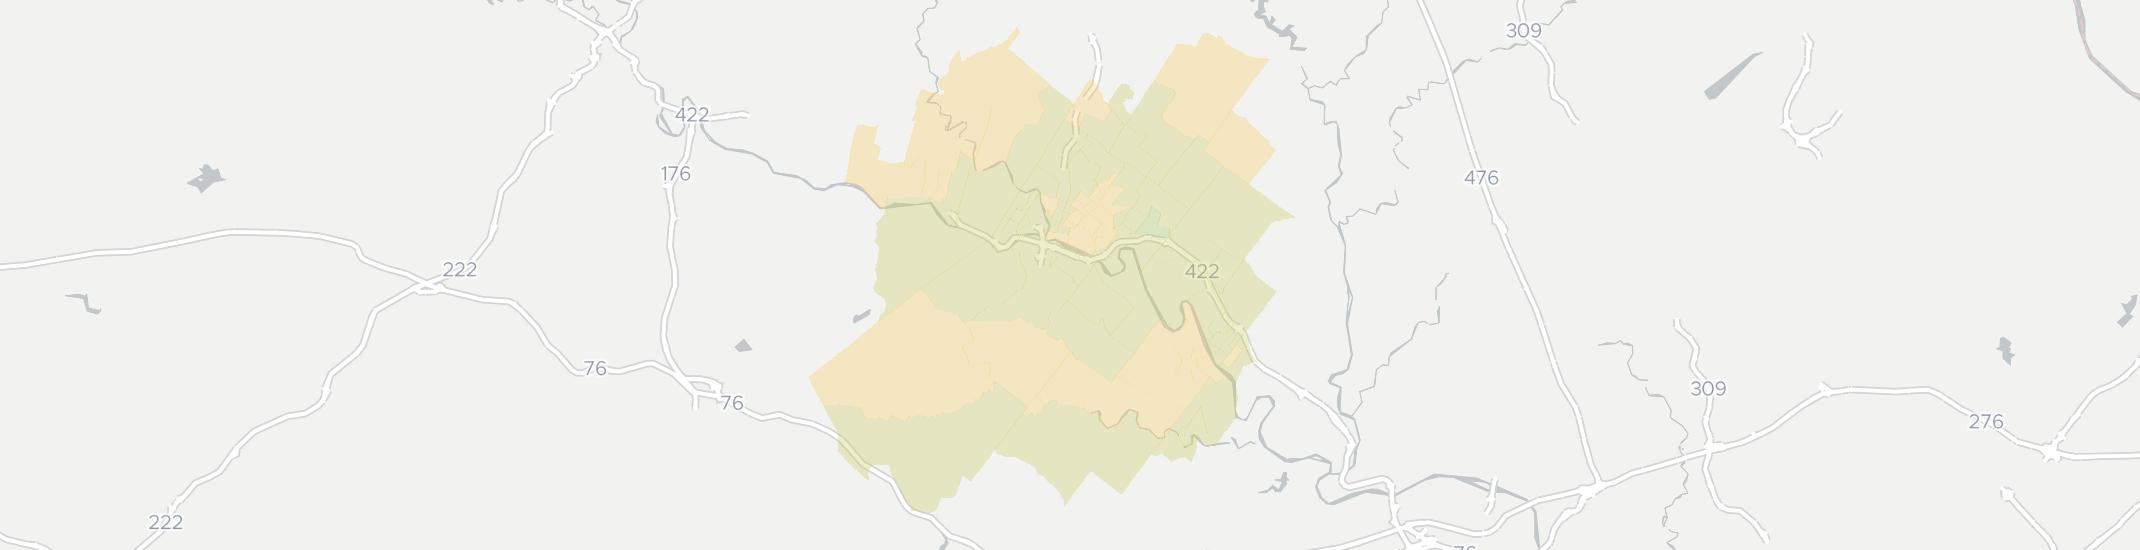 Pottstown Internet Competition Map. Click for interactive map.